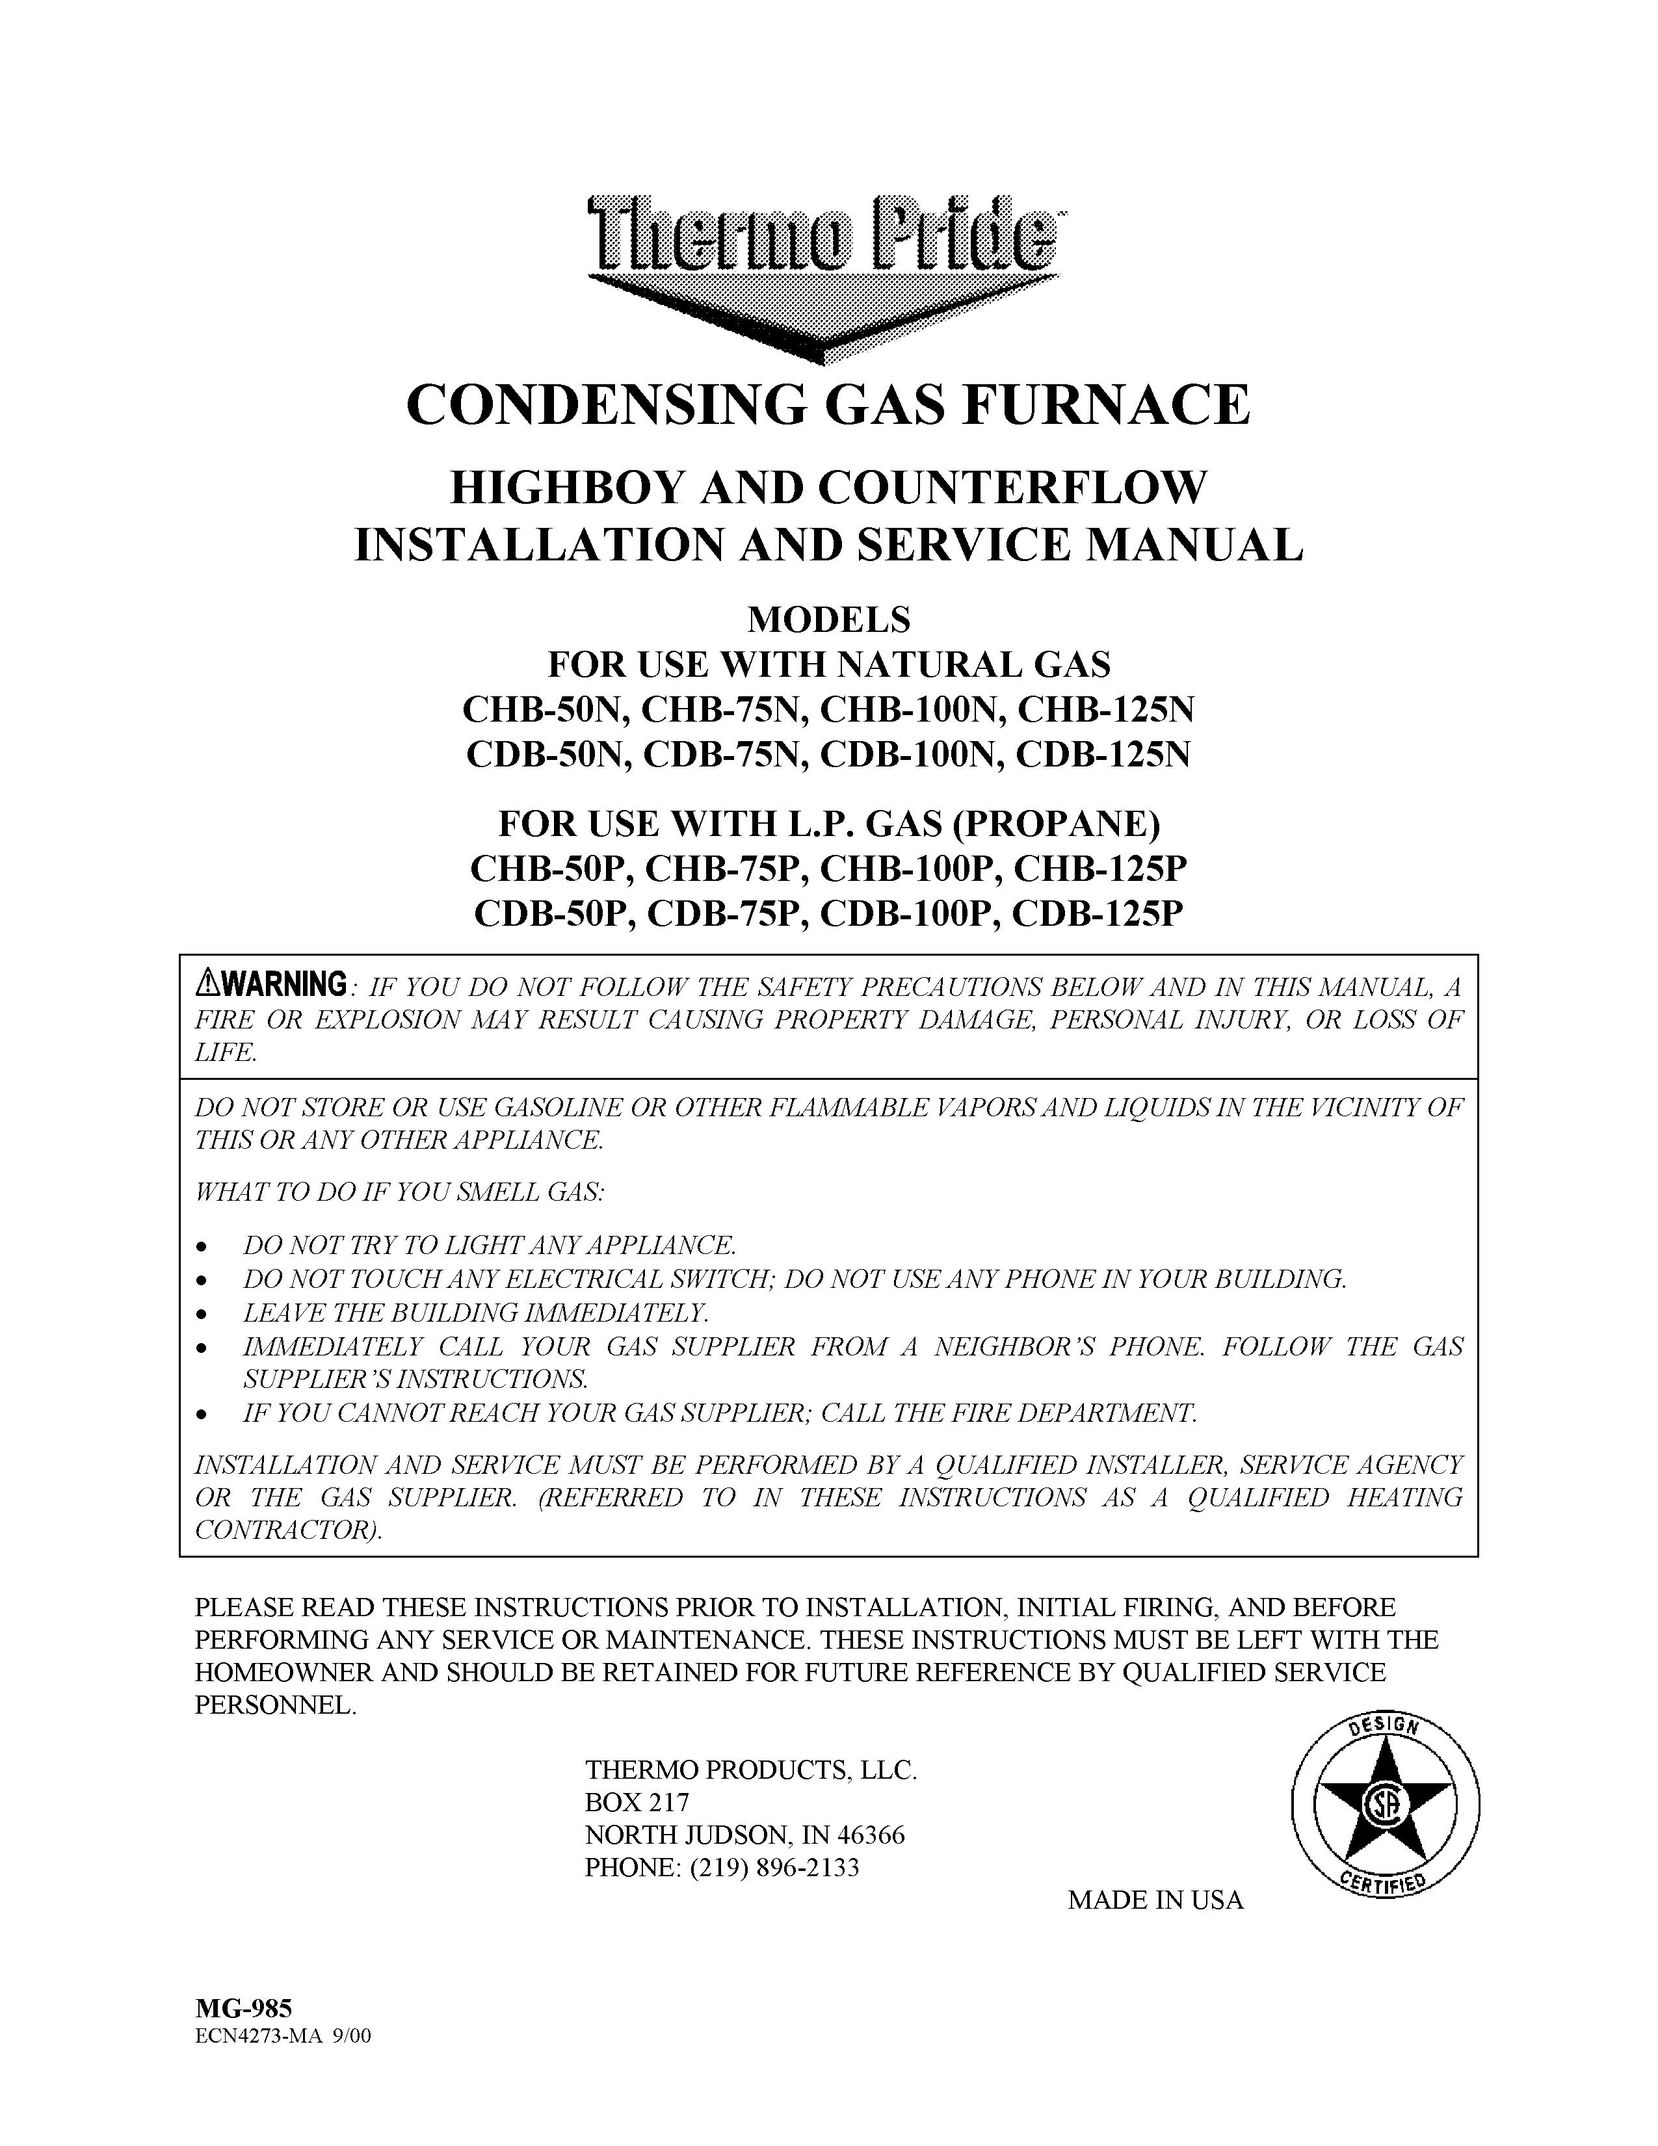 Thermo Products CHB-50N Furnace User Manual